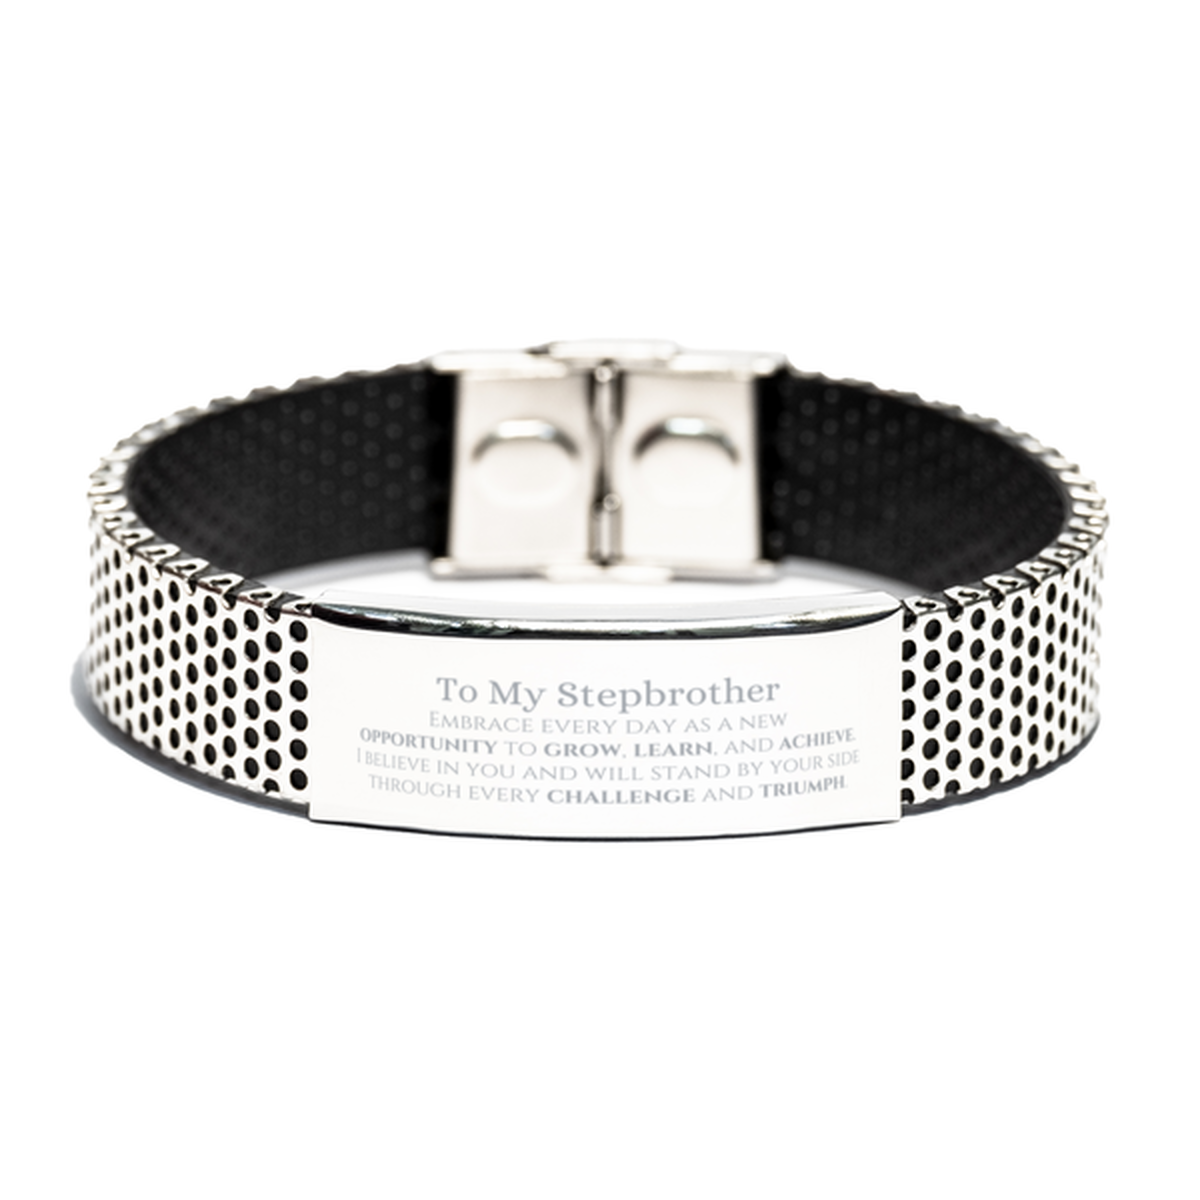 To My Stepbrother Gifts, I believe in you and will stand by your side, Inspirational Stainless Steel Bracelet For Stepbrother, Birthday Christmas Motivational Stepbrother Gifts